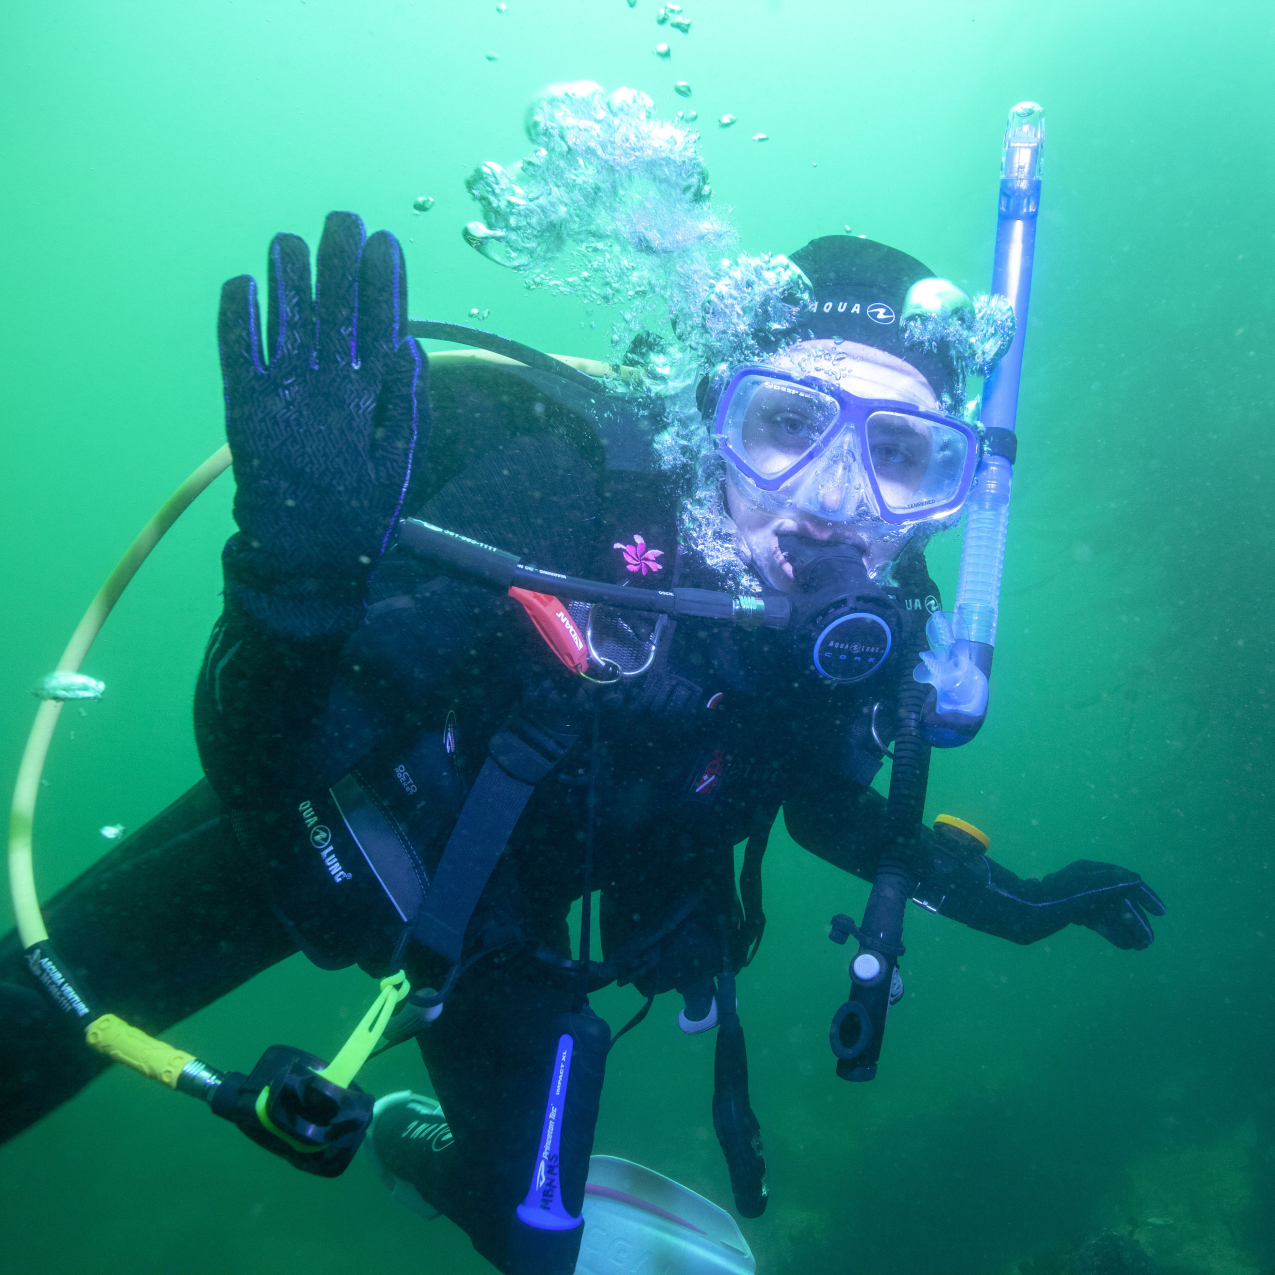 Hannah Brady, a 2018 NOAA Hollings scholar, waves to the camera after having finished taking pre-construction photos of the Monterey Bay Aquarium pipe for her summer internship.